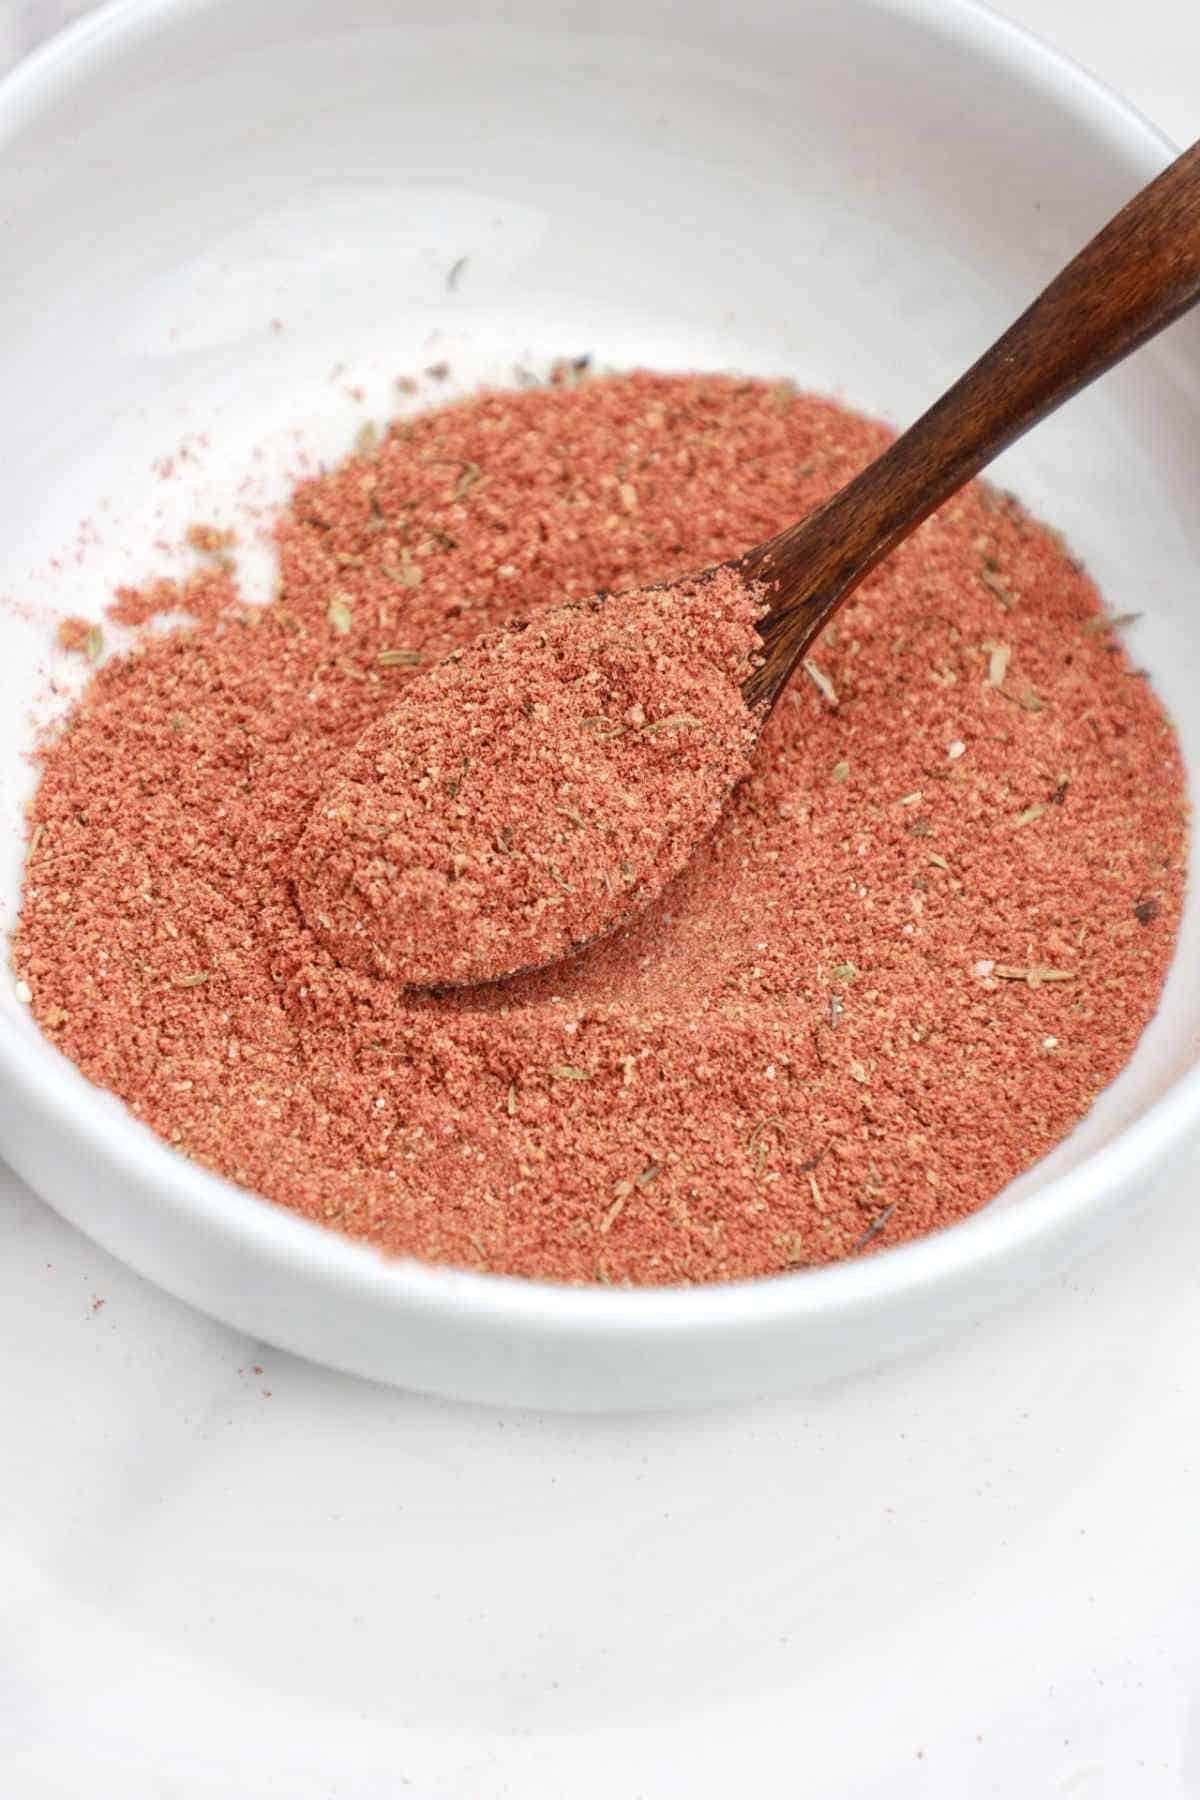 salmon seasoning in a small white bowl.